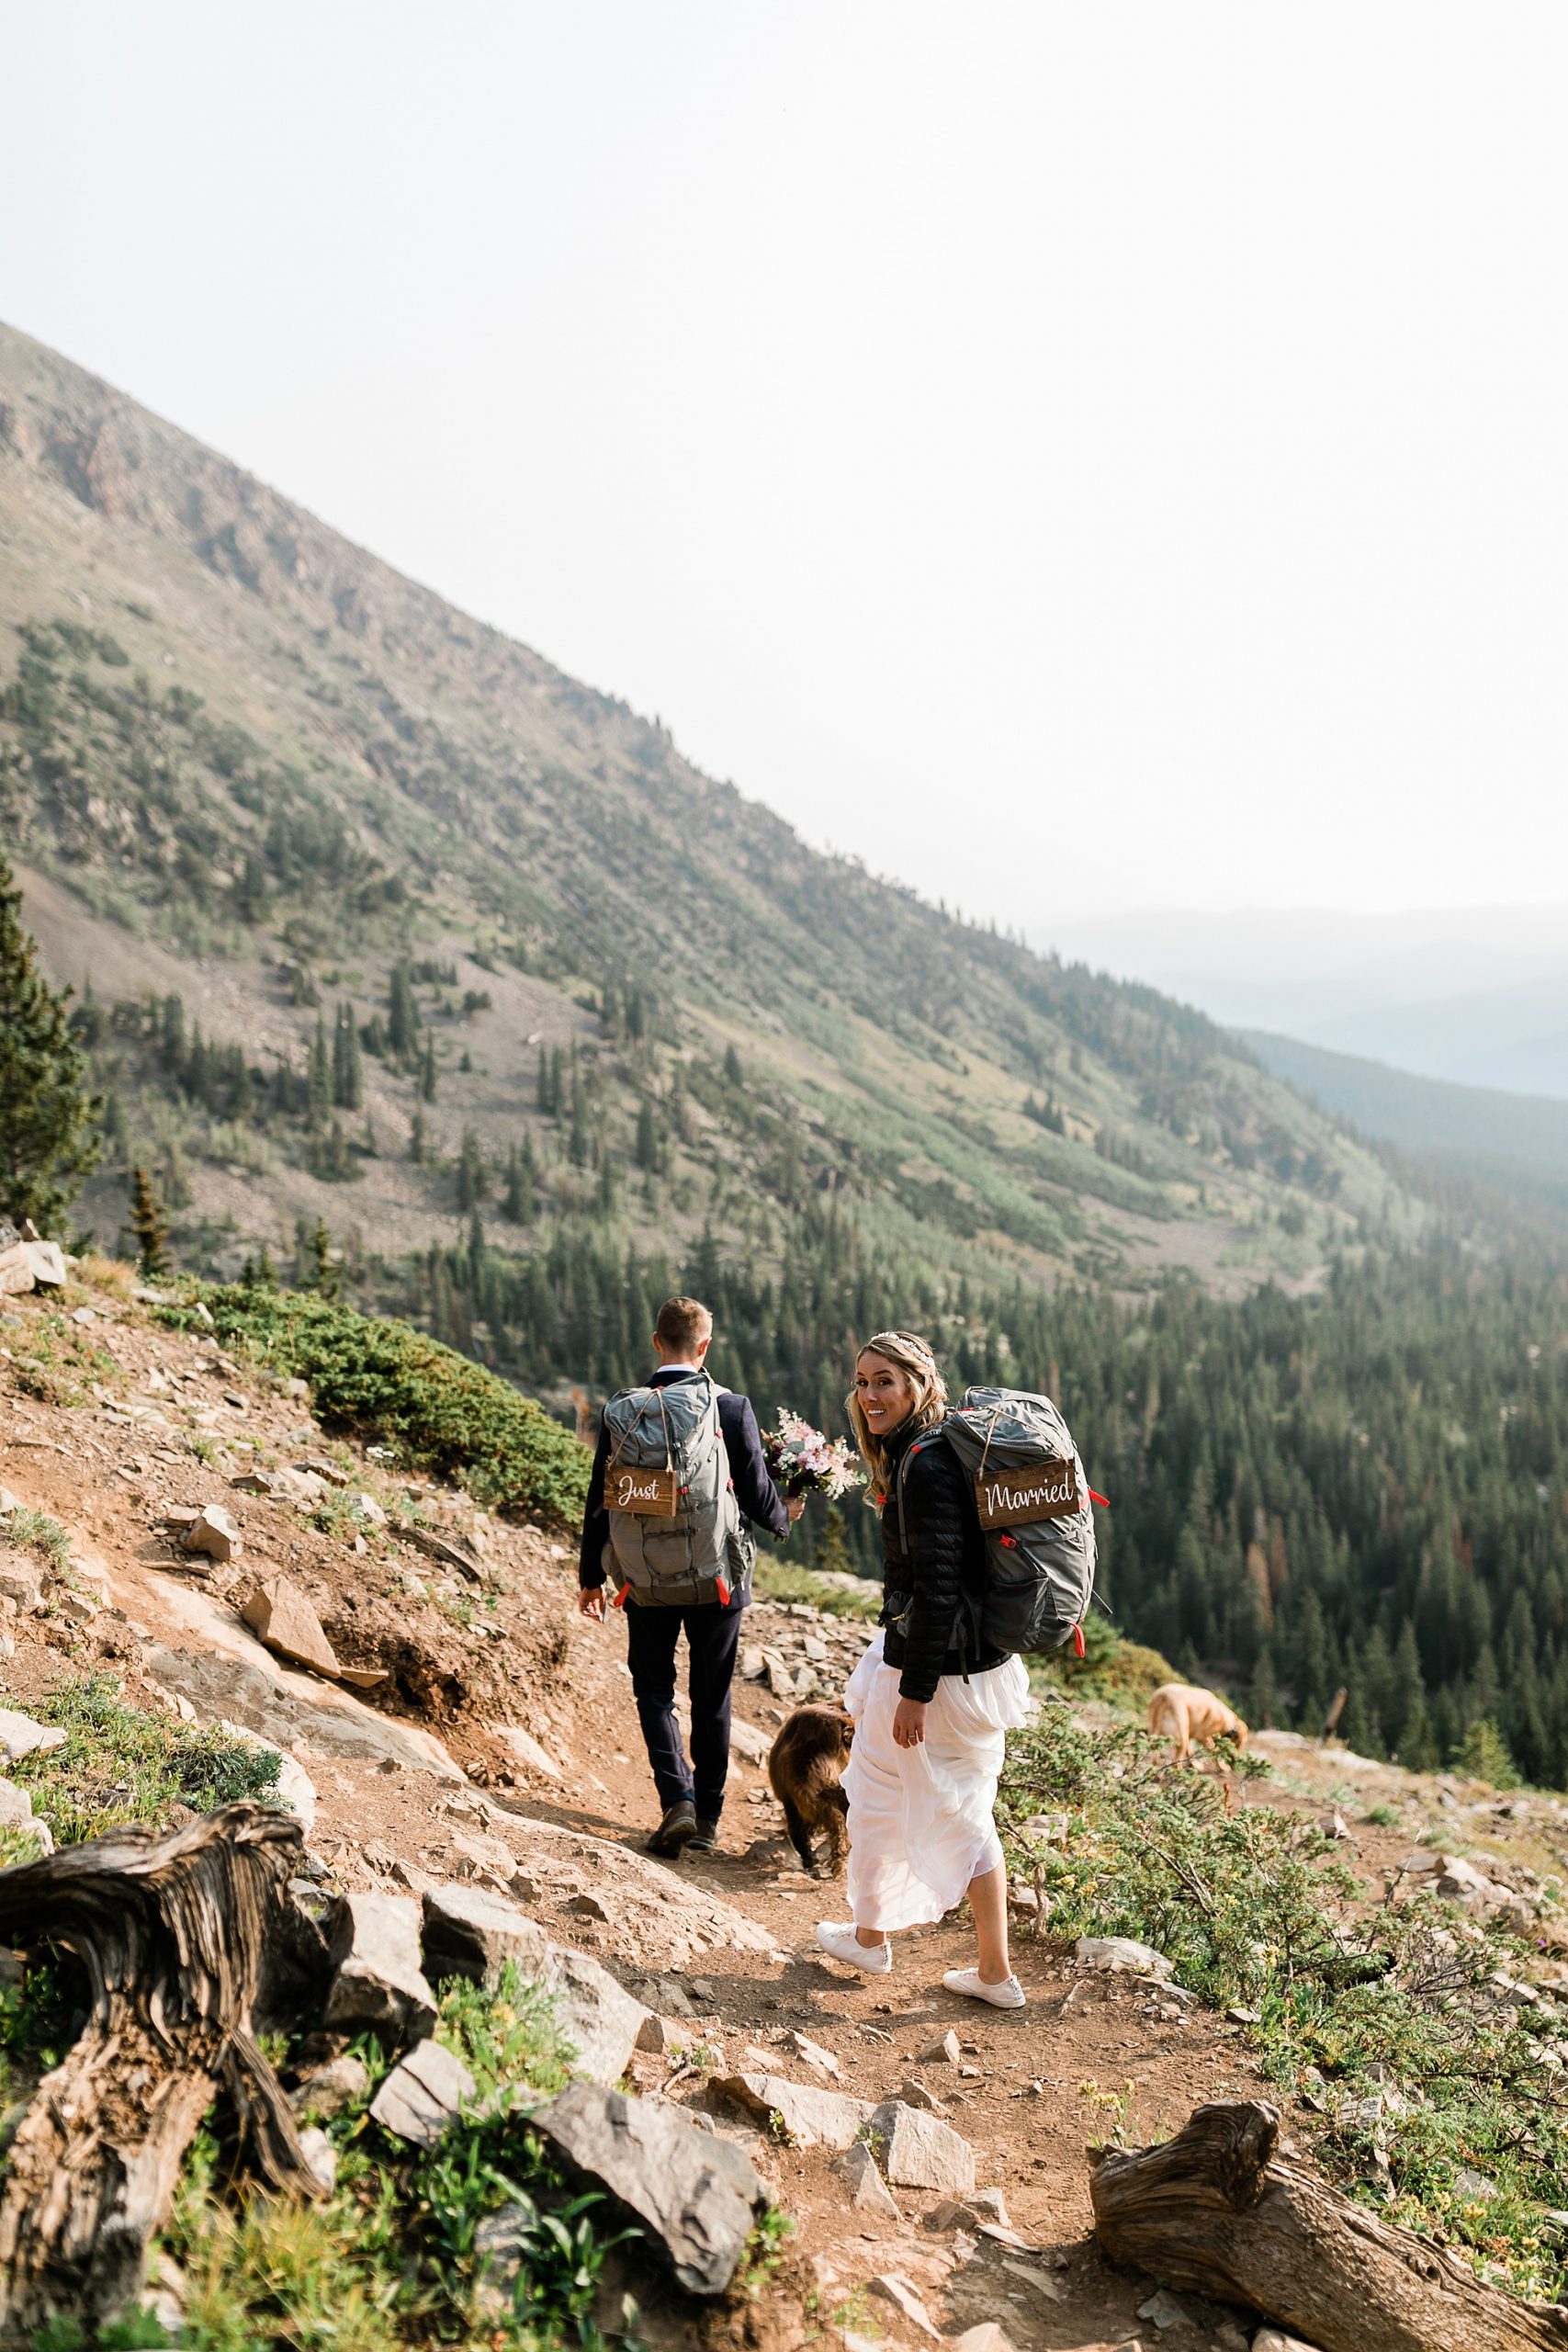 colorado hiking elopement just married signs on back packs